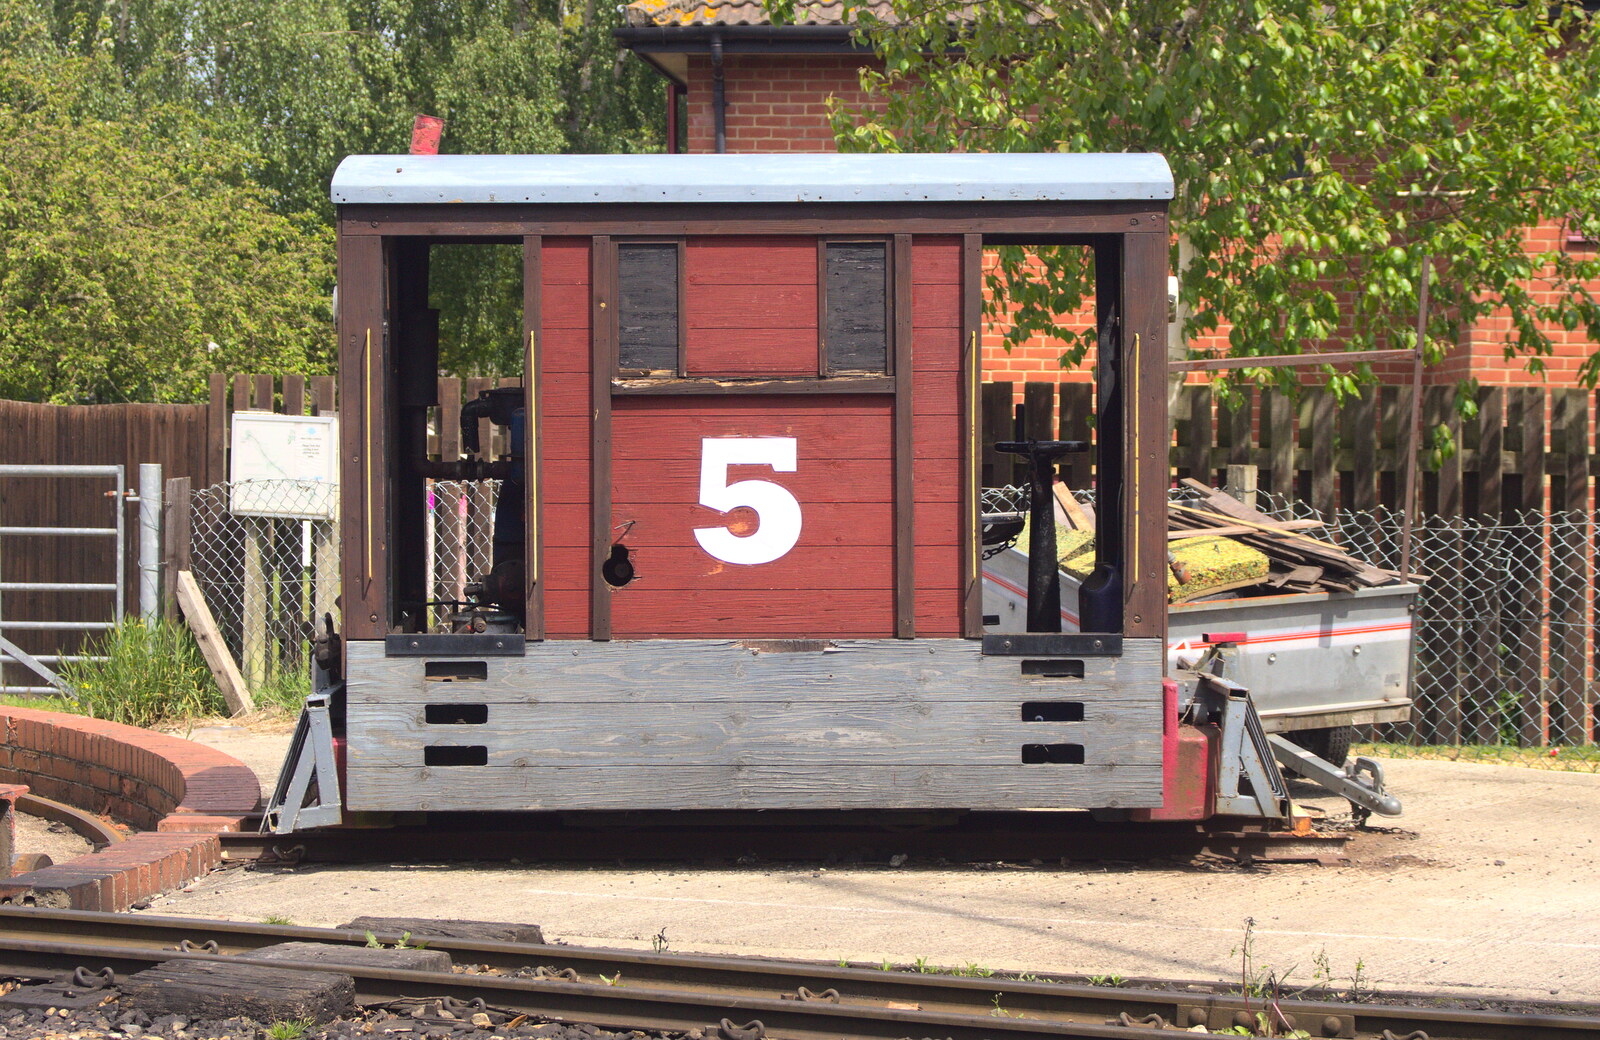 A carriage with a '5' on it from The Bure Valley Railway, Aylsham, Norfolk - 26th May 2013